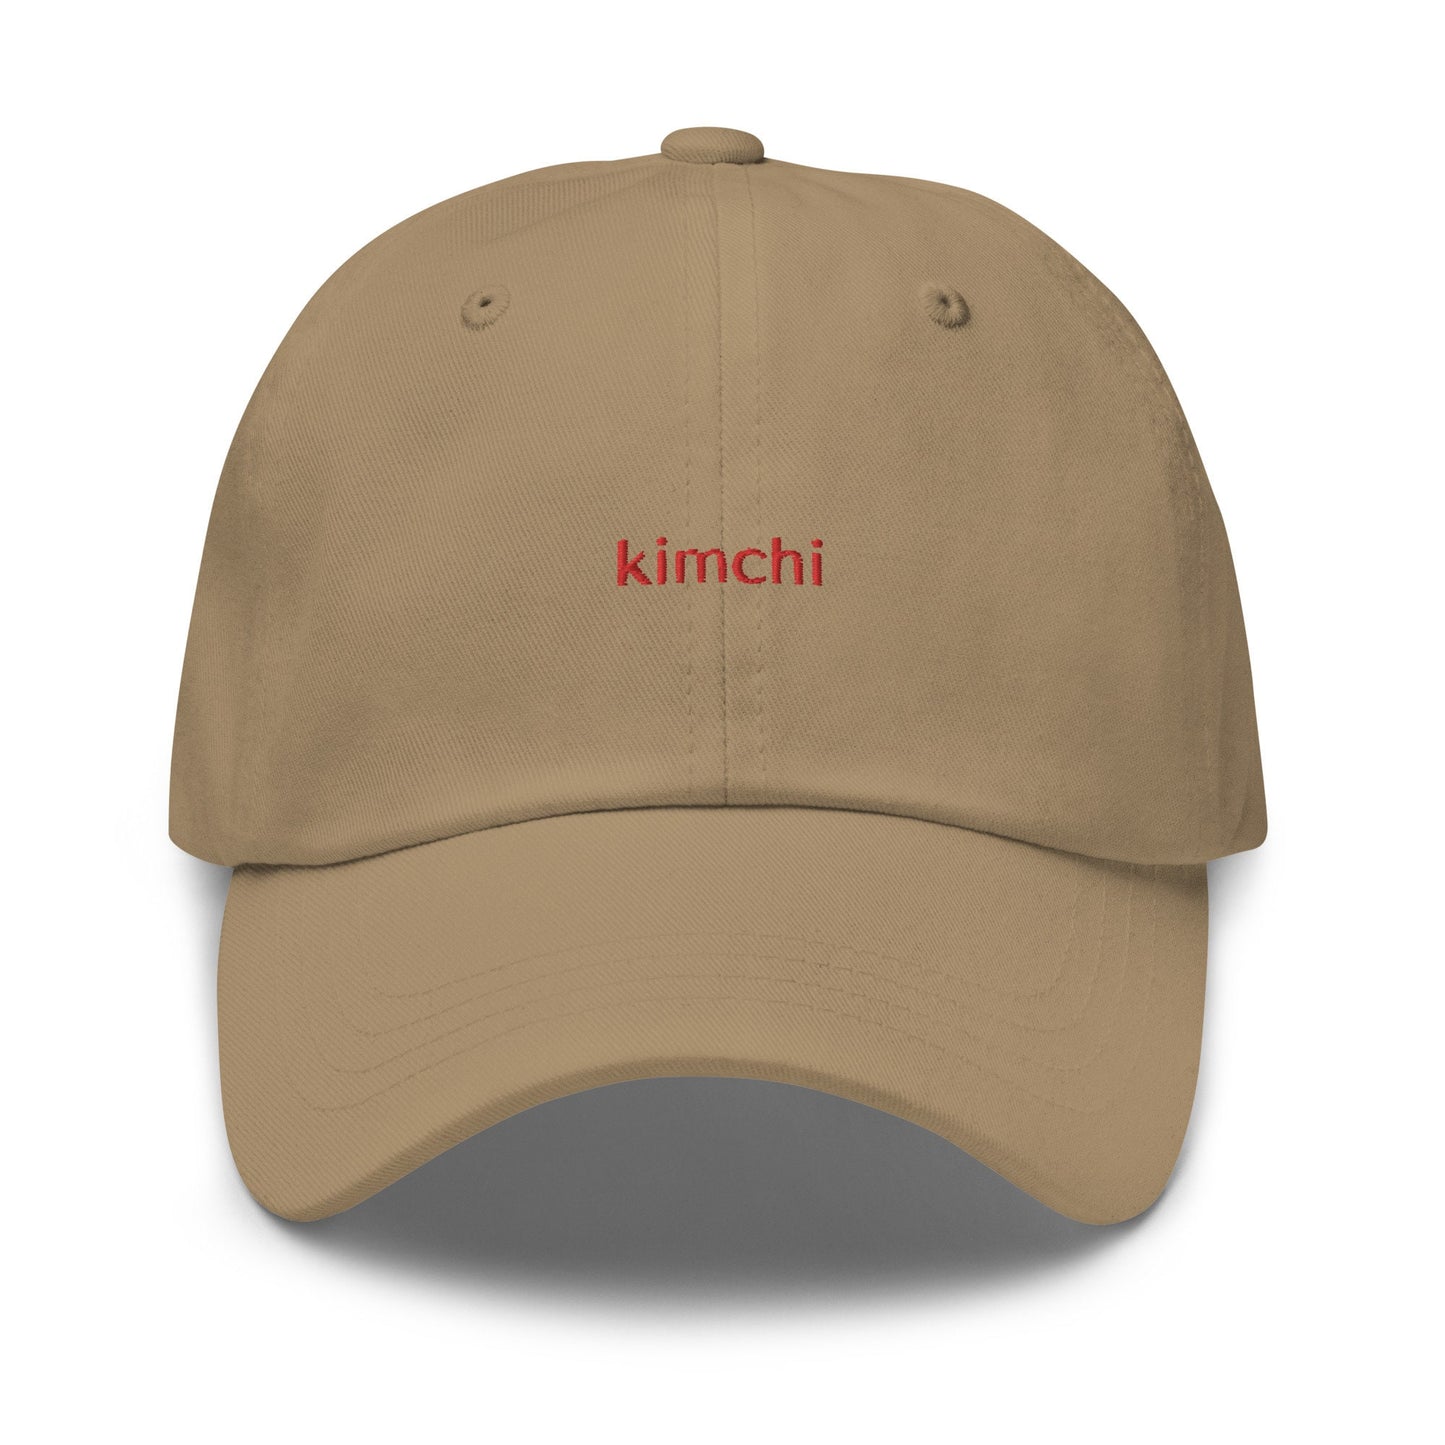 Kimchi Hat - Korean Food Gift - Multiple Colors - Cotton Embroidered Cap